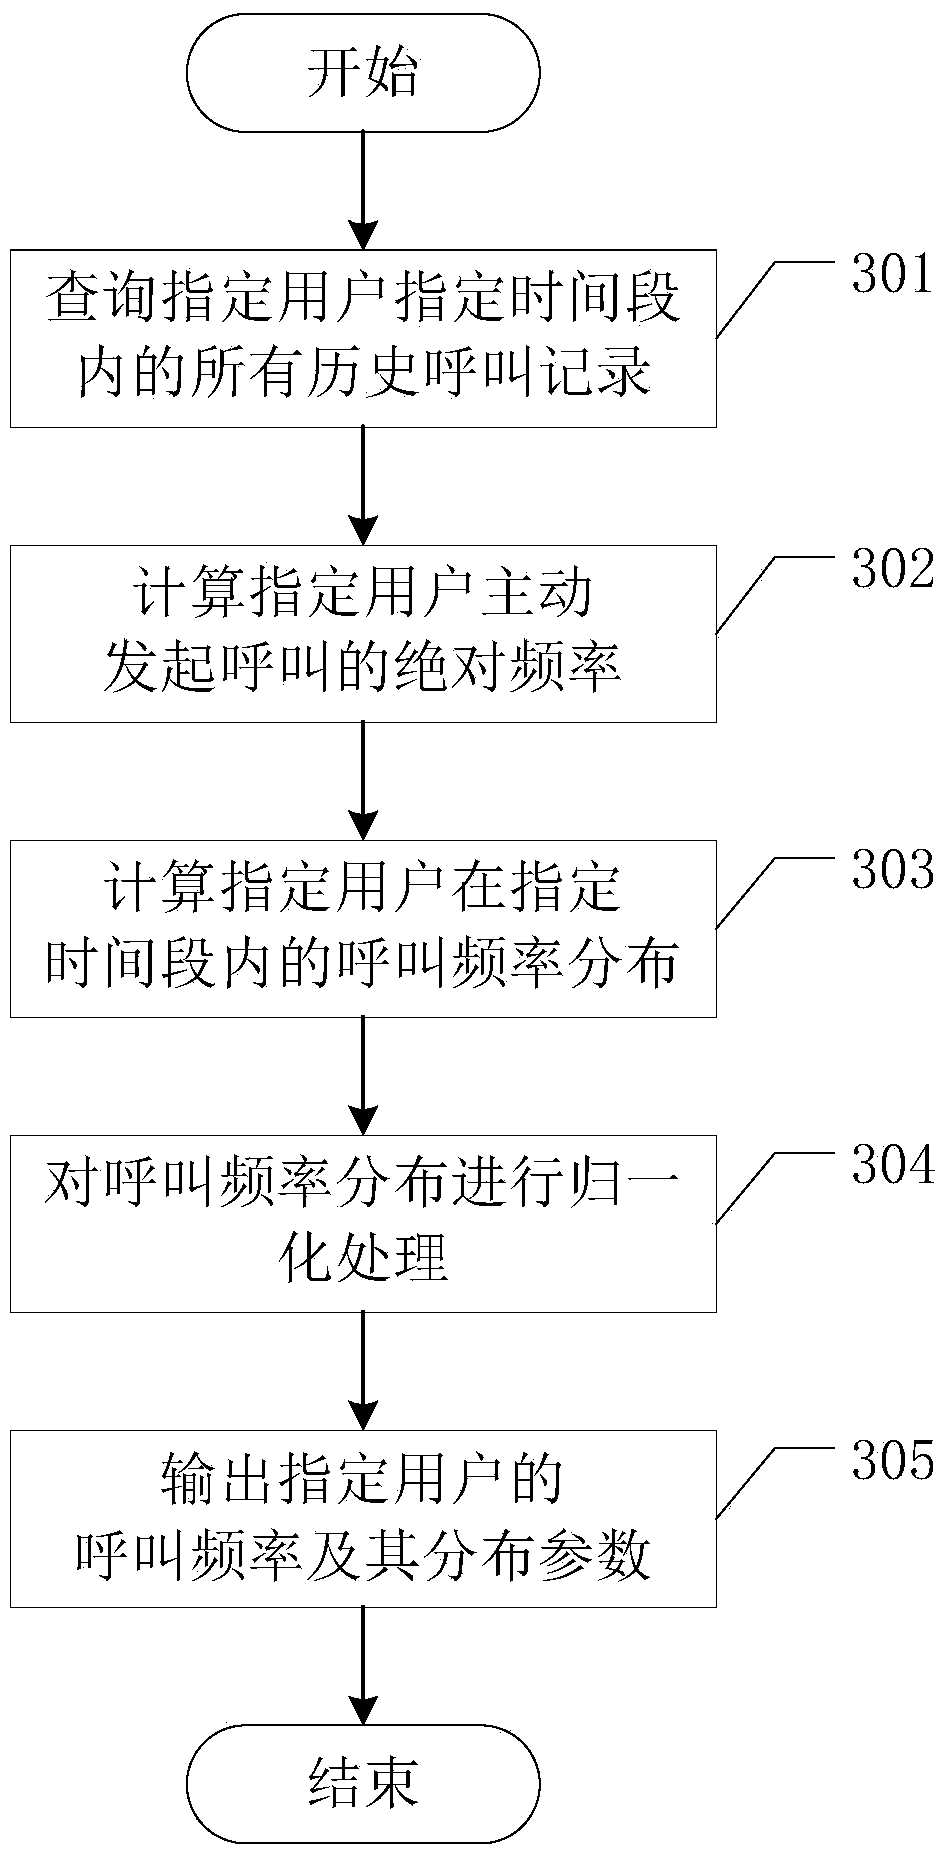 User call behavior model generating method applicable to spam voice filtering